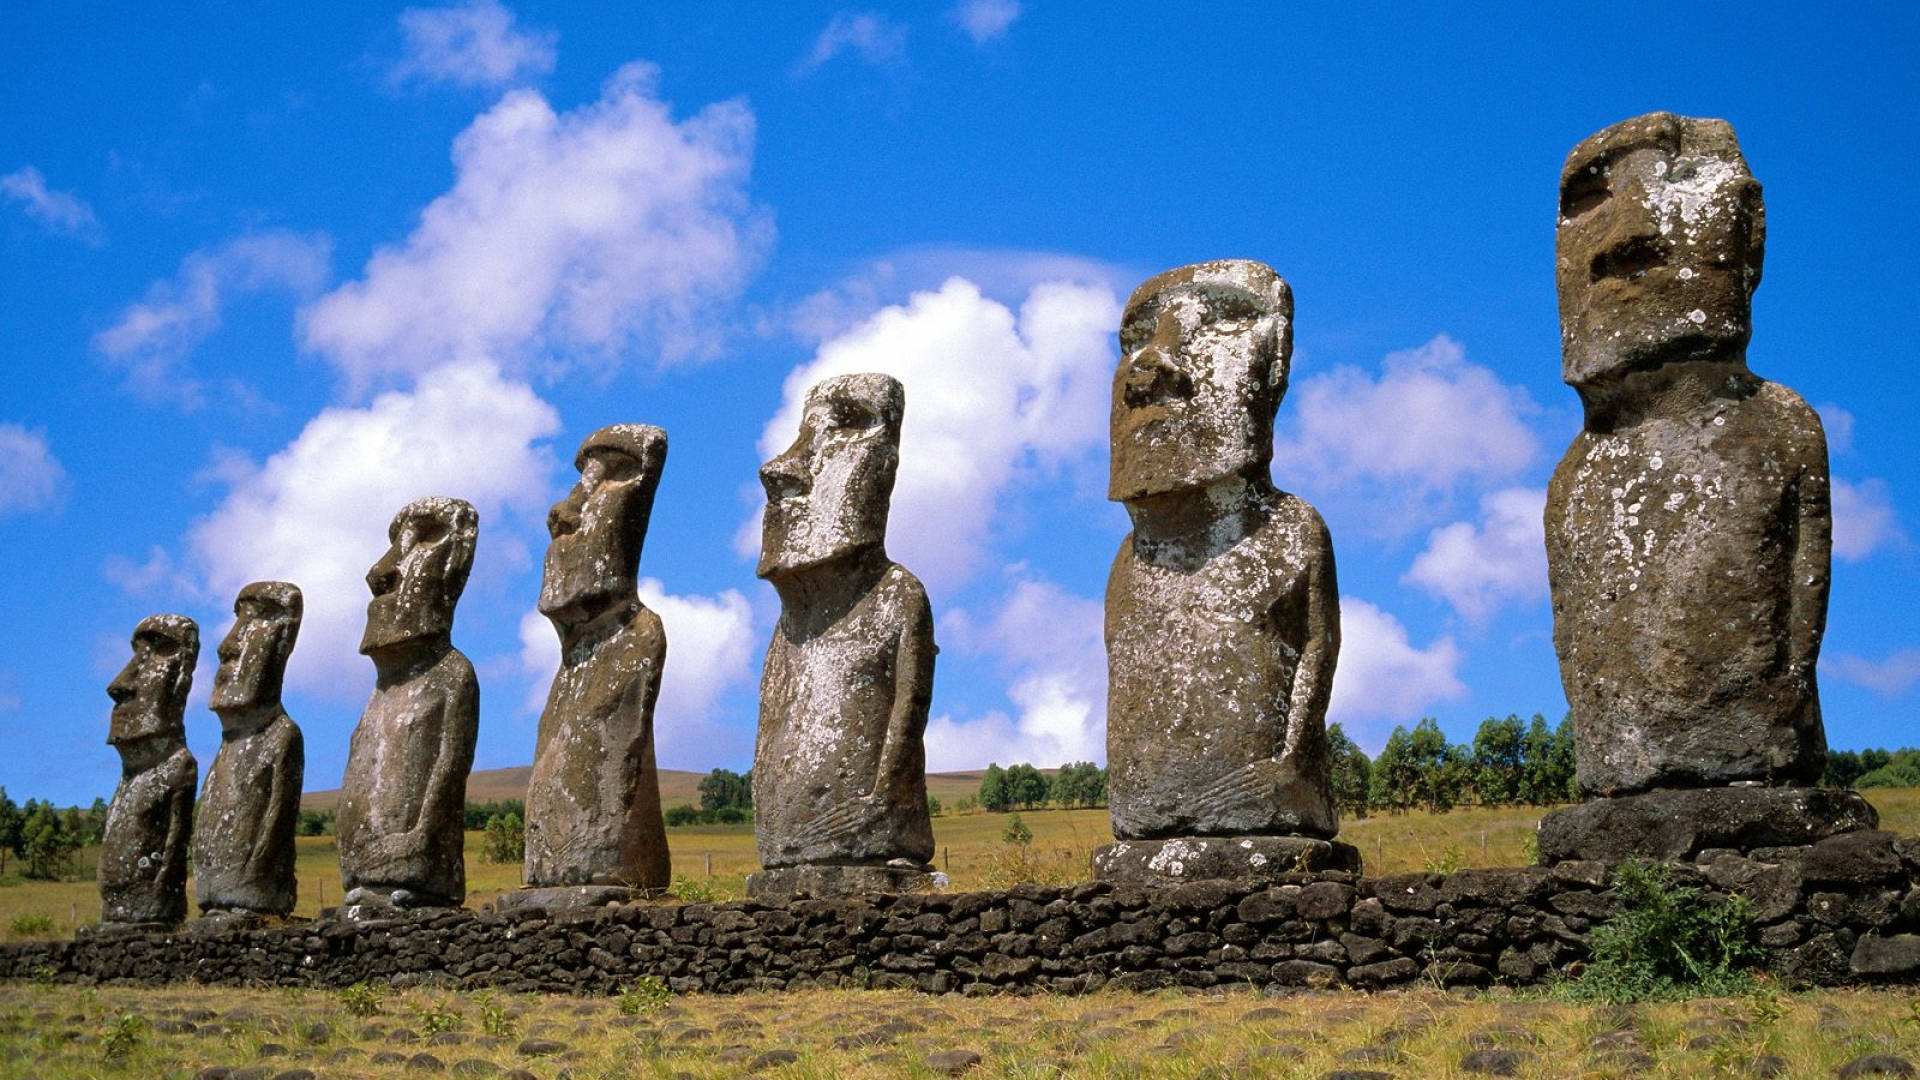 Monolith Human Figures In Chile Wallpaper